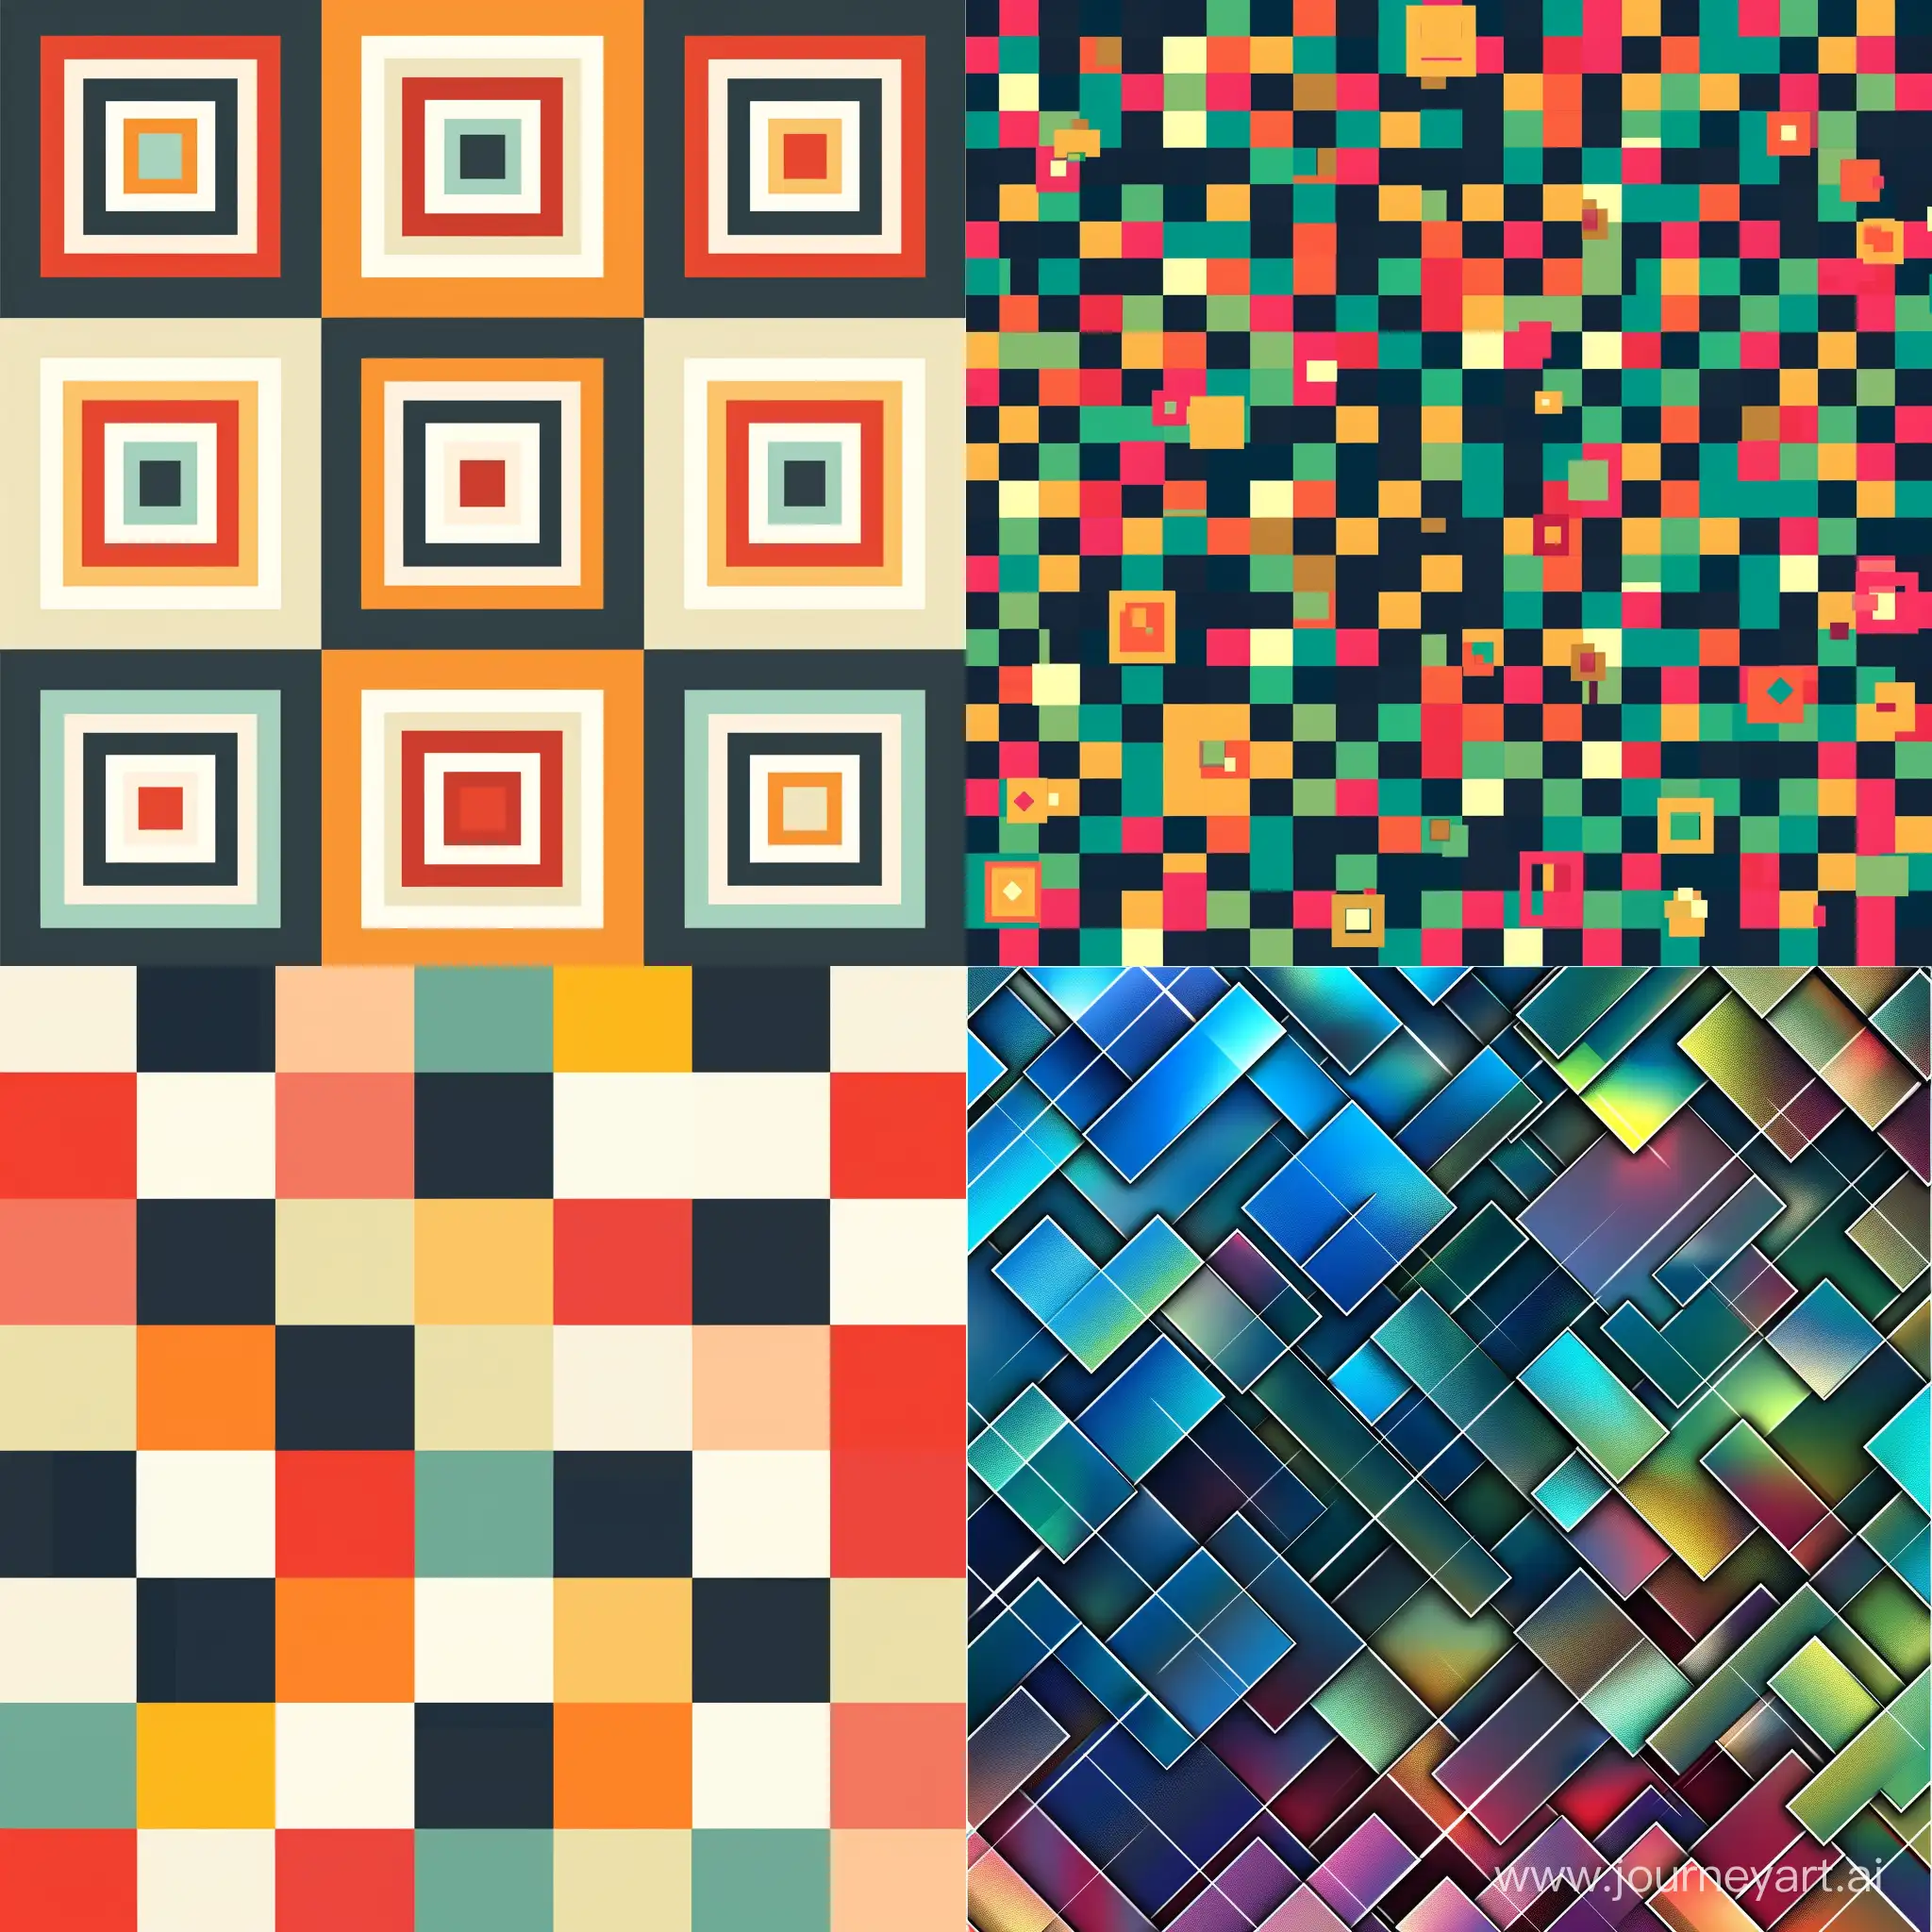 Random square pattern for website background, high resolution, good quality